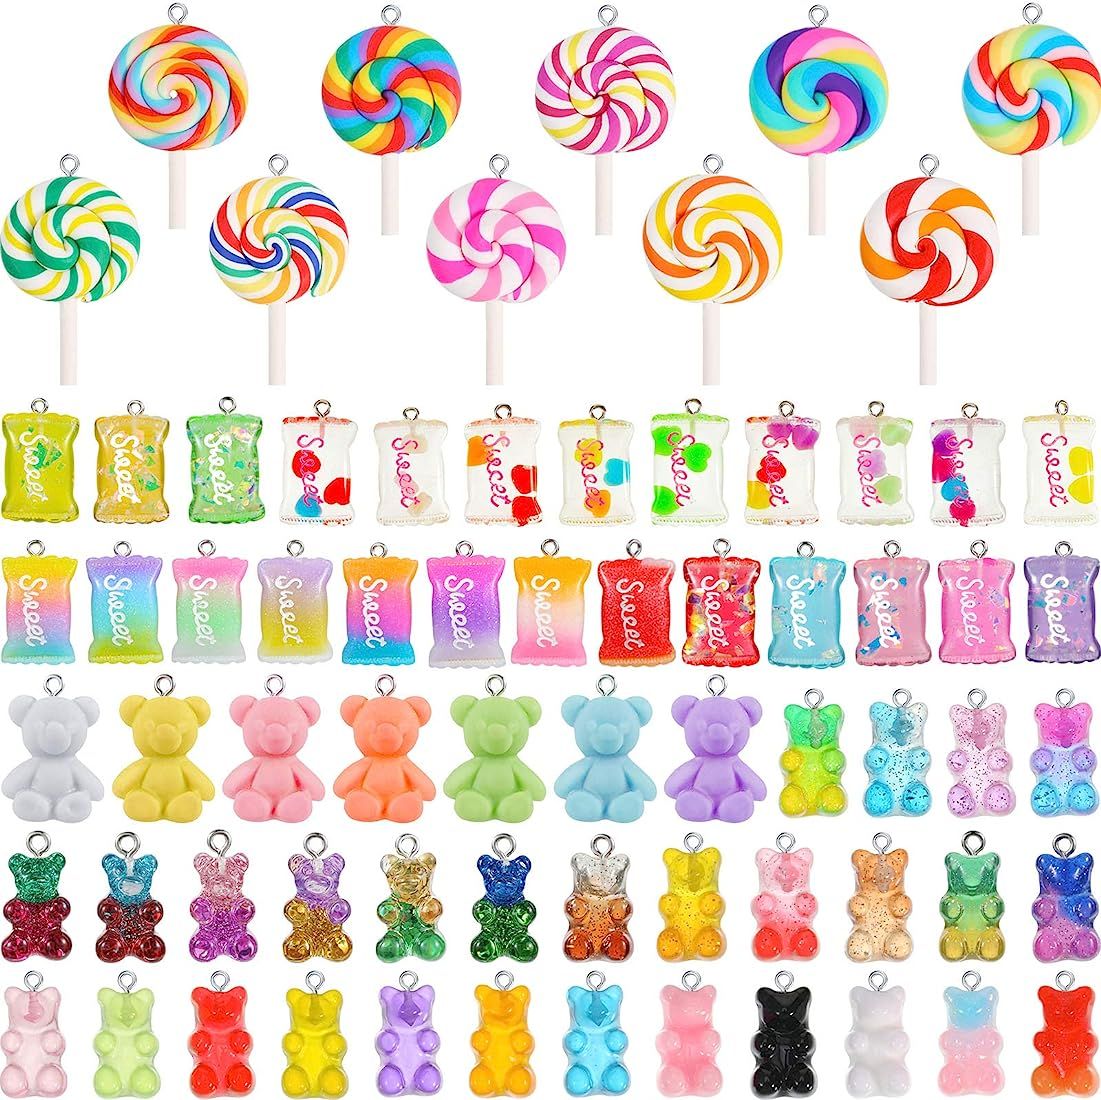 Hicarer 70 Pieces Colorful Candy Pendant Charm for Jewelry Making Cute Gummy Candy Bear Lollipops... | Amazon (US)